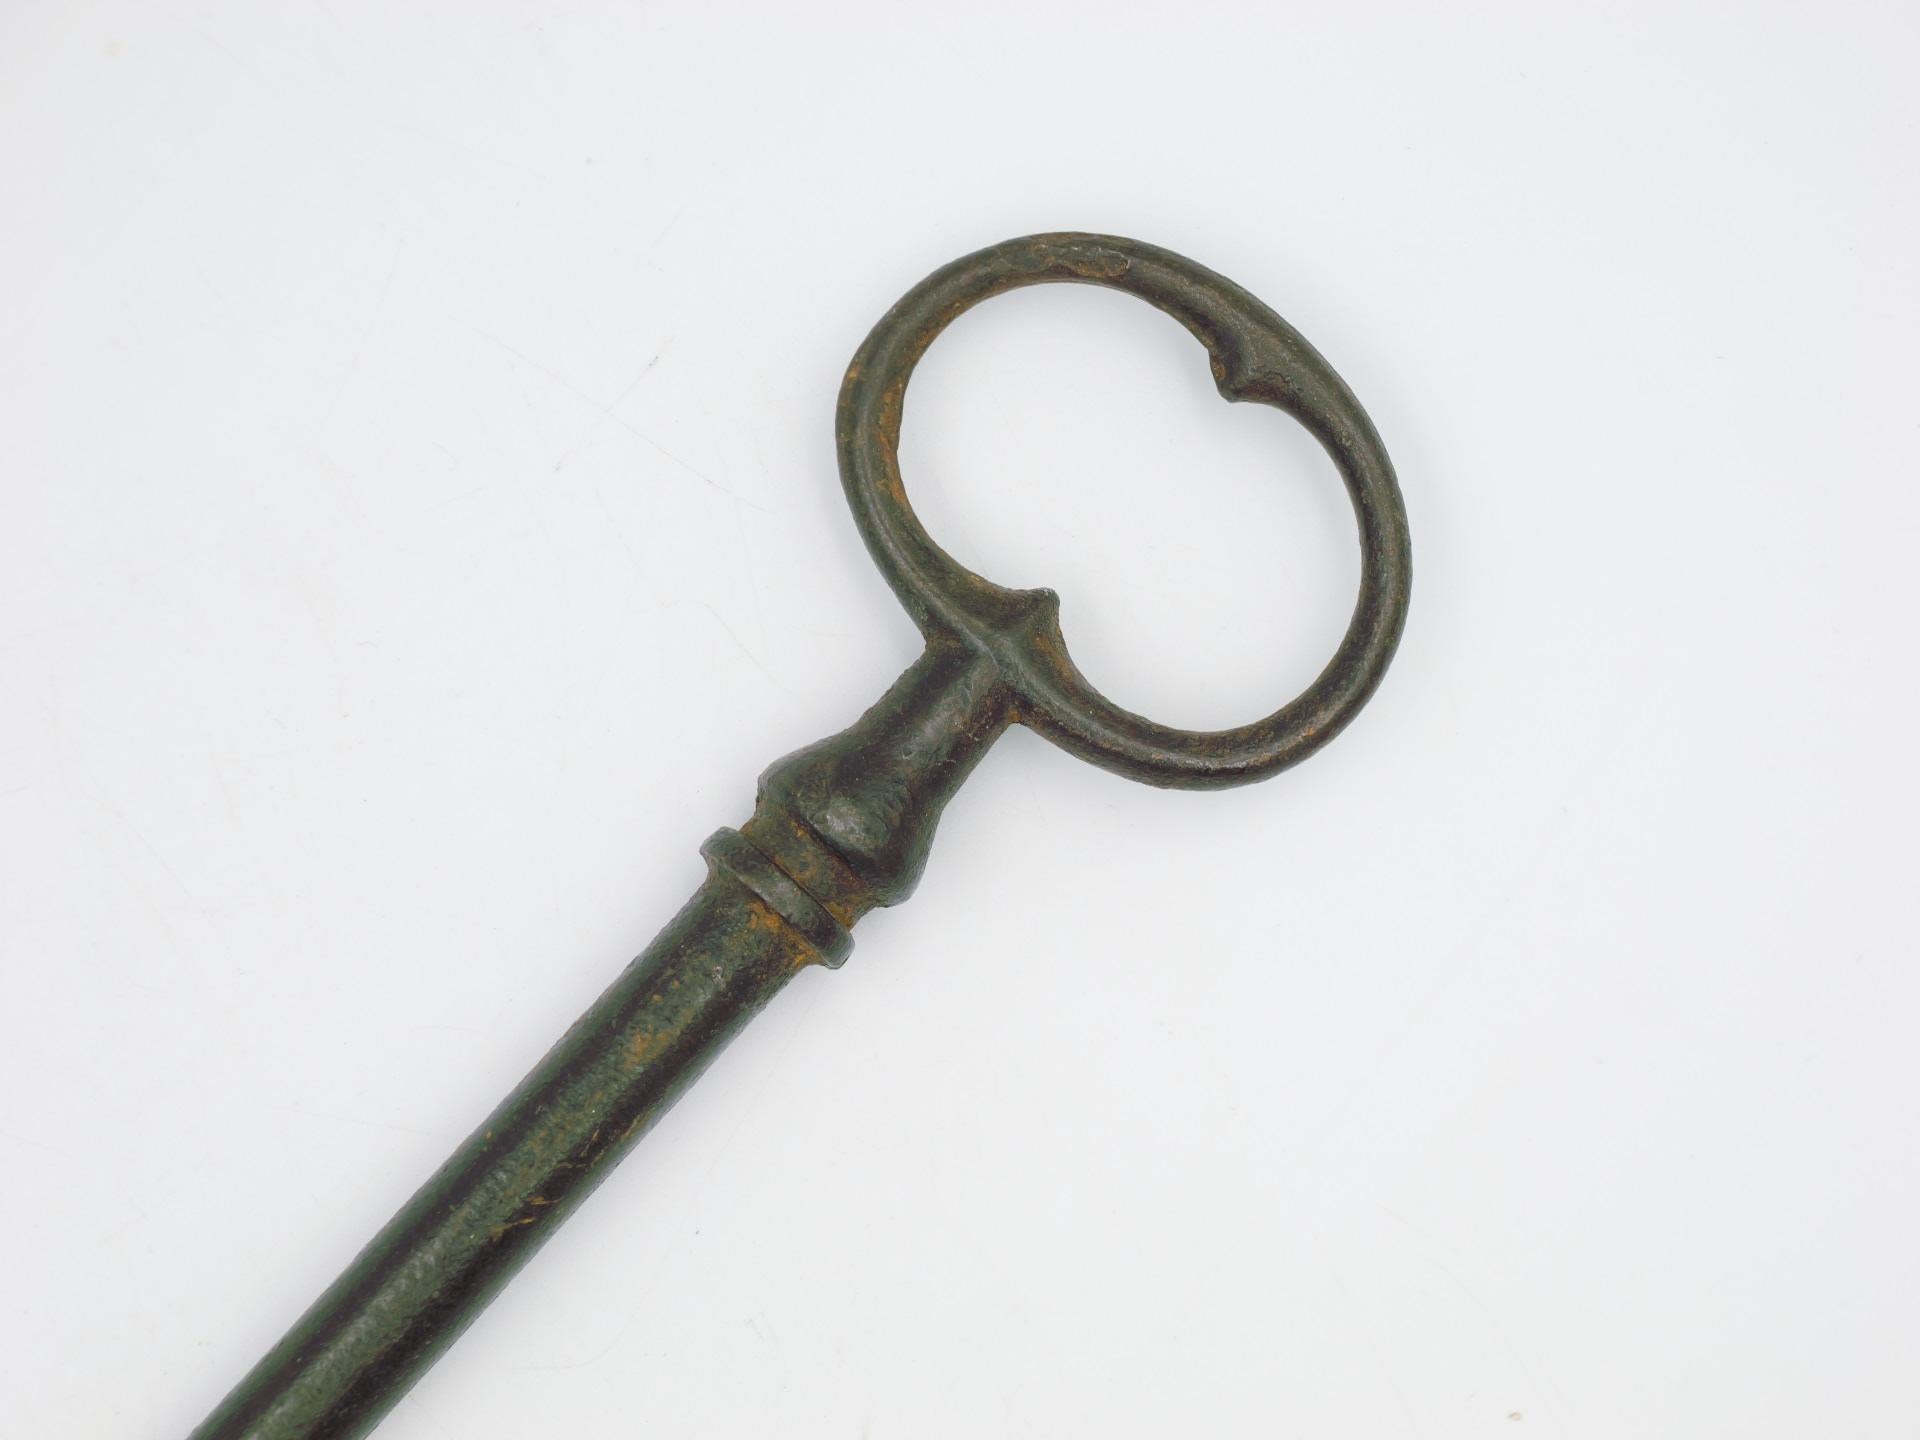 This Antique 17th-century wrought iron key is a fascinating artifact that transports us back to an era of intricate craftsmanship and timeless elegance. This key, crafted with wrought iron, showcases the skill and artistry of blacksmiths from the